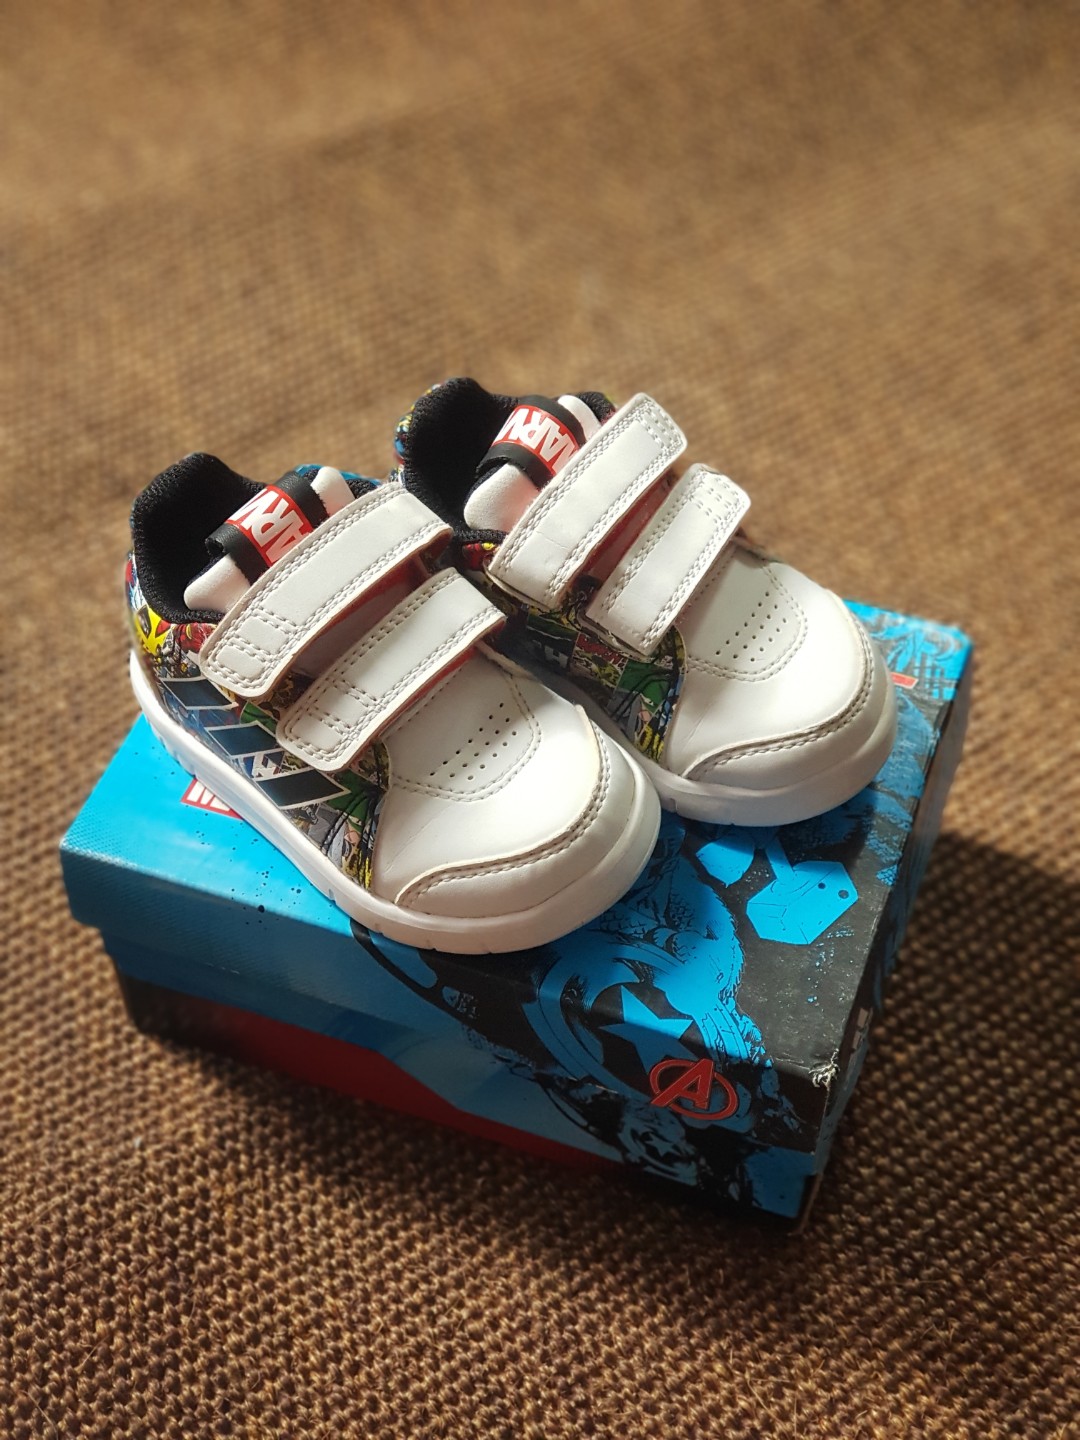 marvel baby shoes